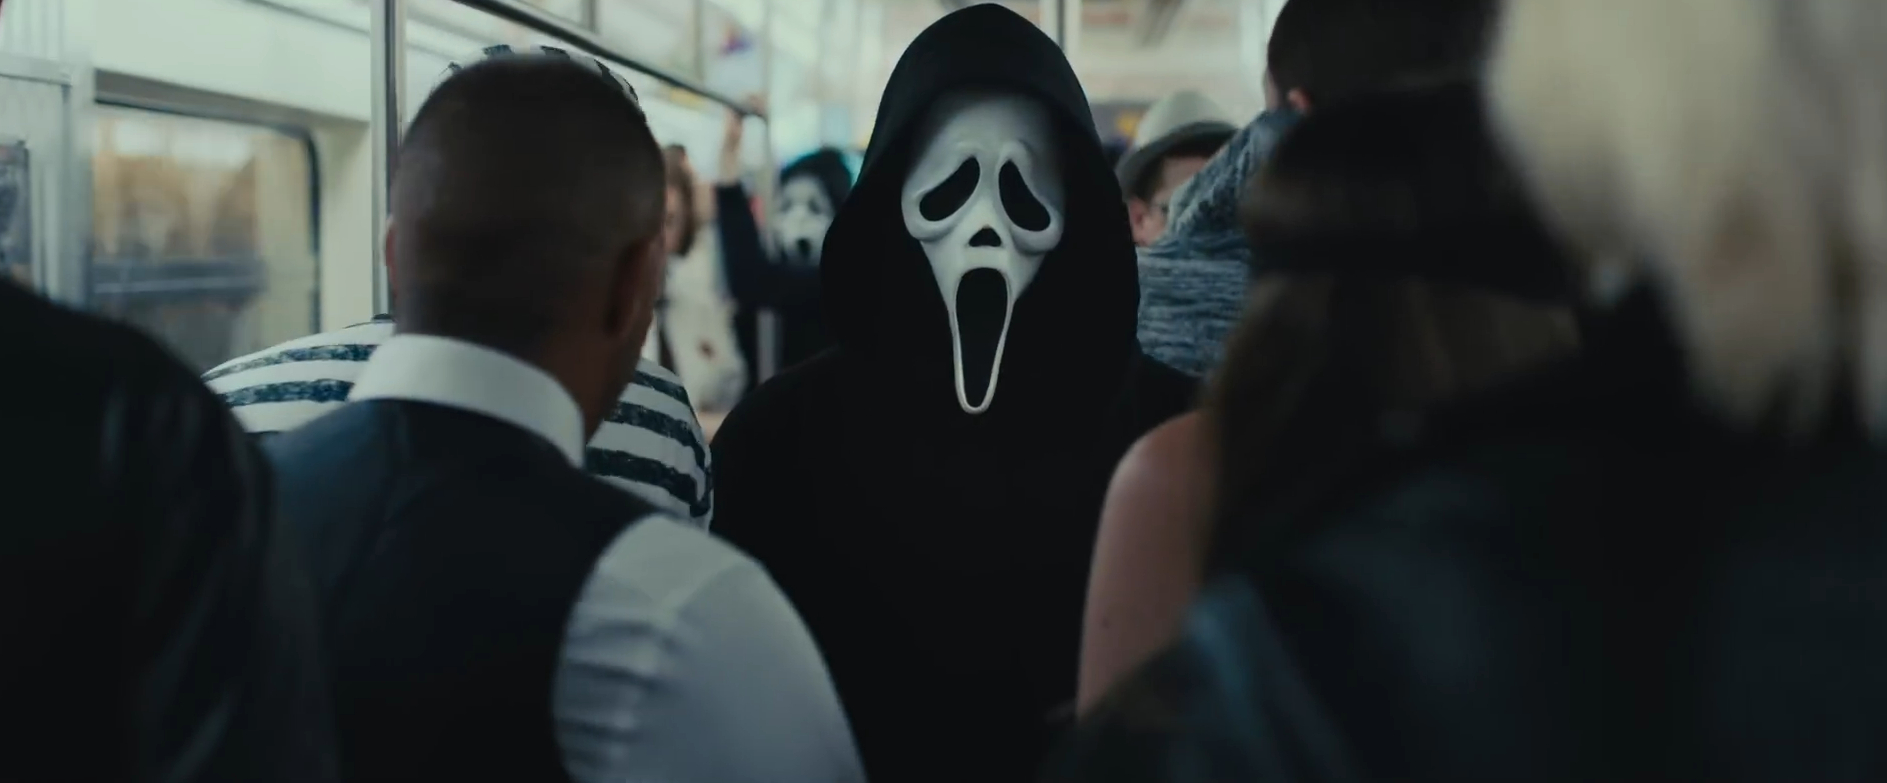 A Very Deep Dive Into the Easter Eggs and Horror Trivia in the Scream Movie Universe